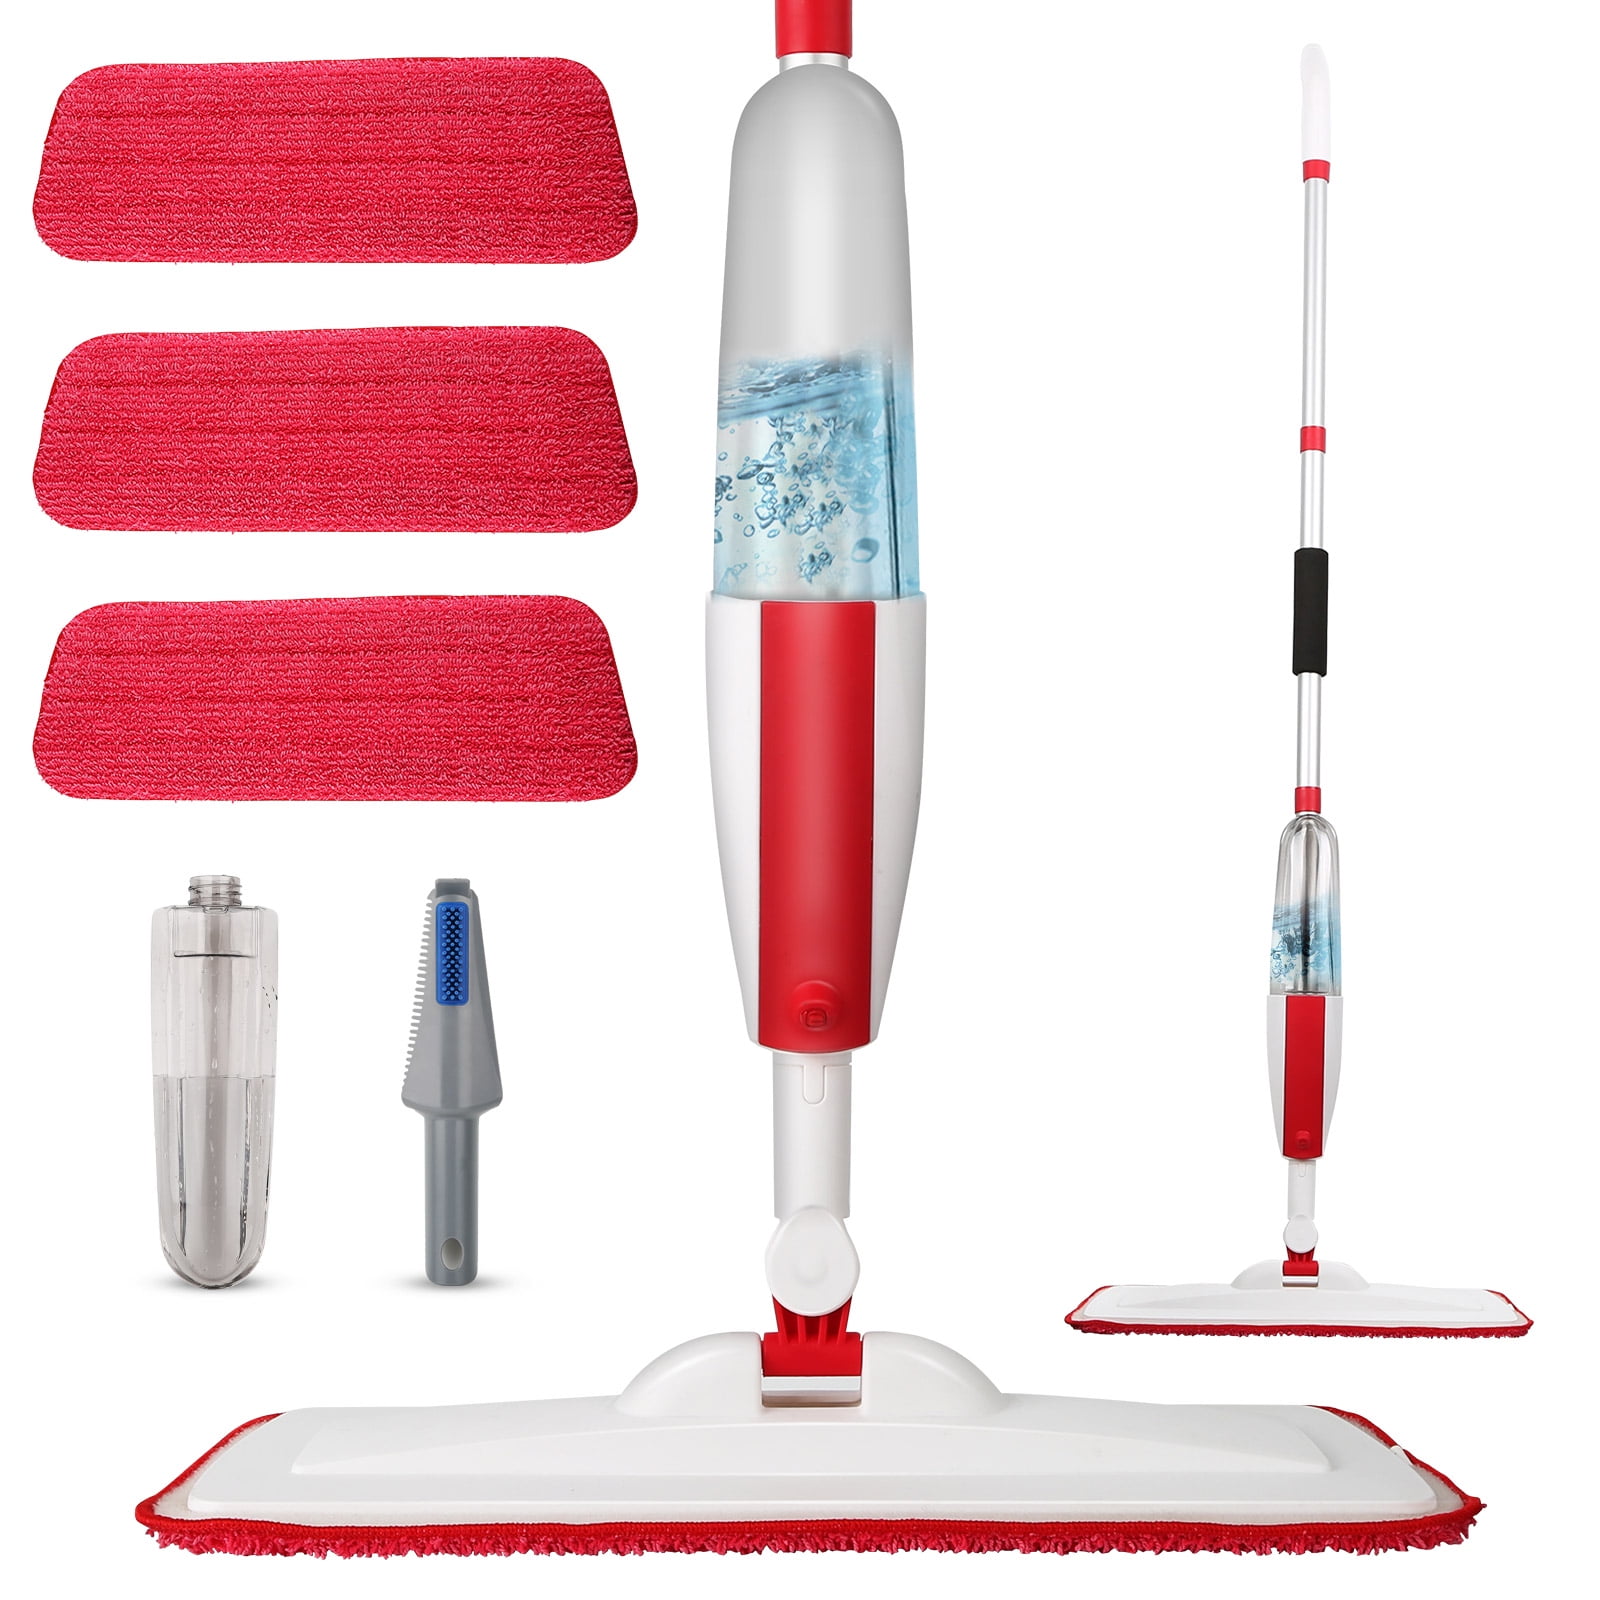 Kibhous Superfine Fiber Spray Mop for Floor Cleaning, with Refillable Spray  Bottle and 3 Washable Pads, Used for Flat Mop in Home Kitchen, Hardwood